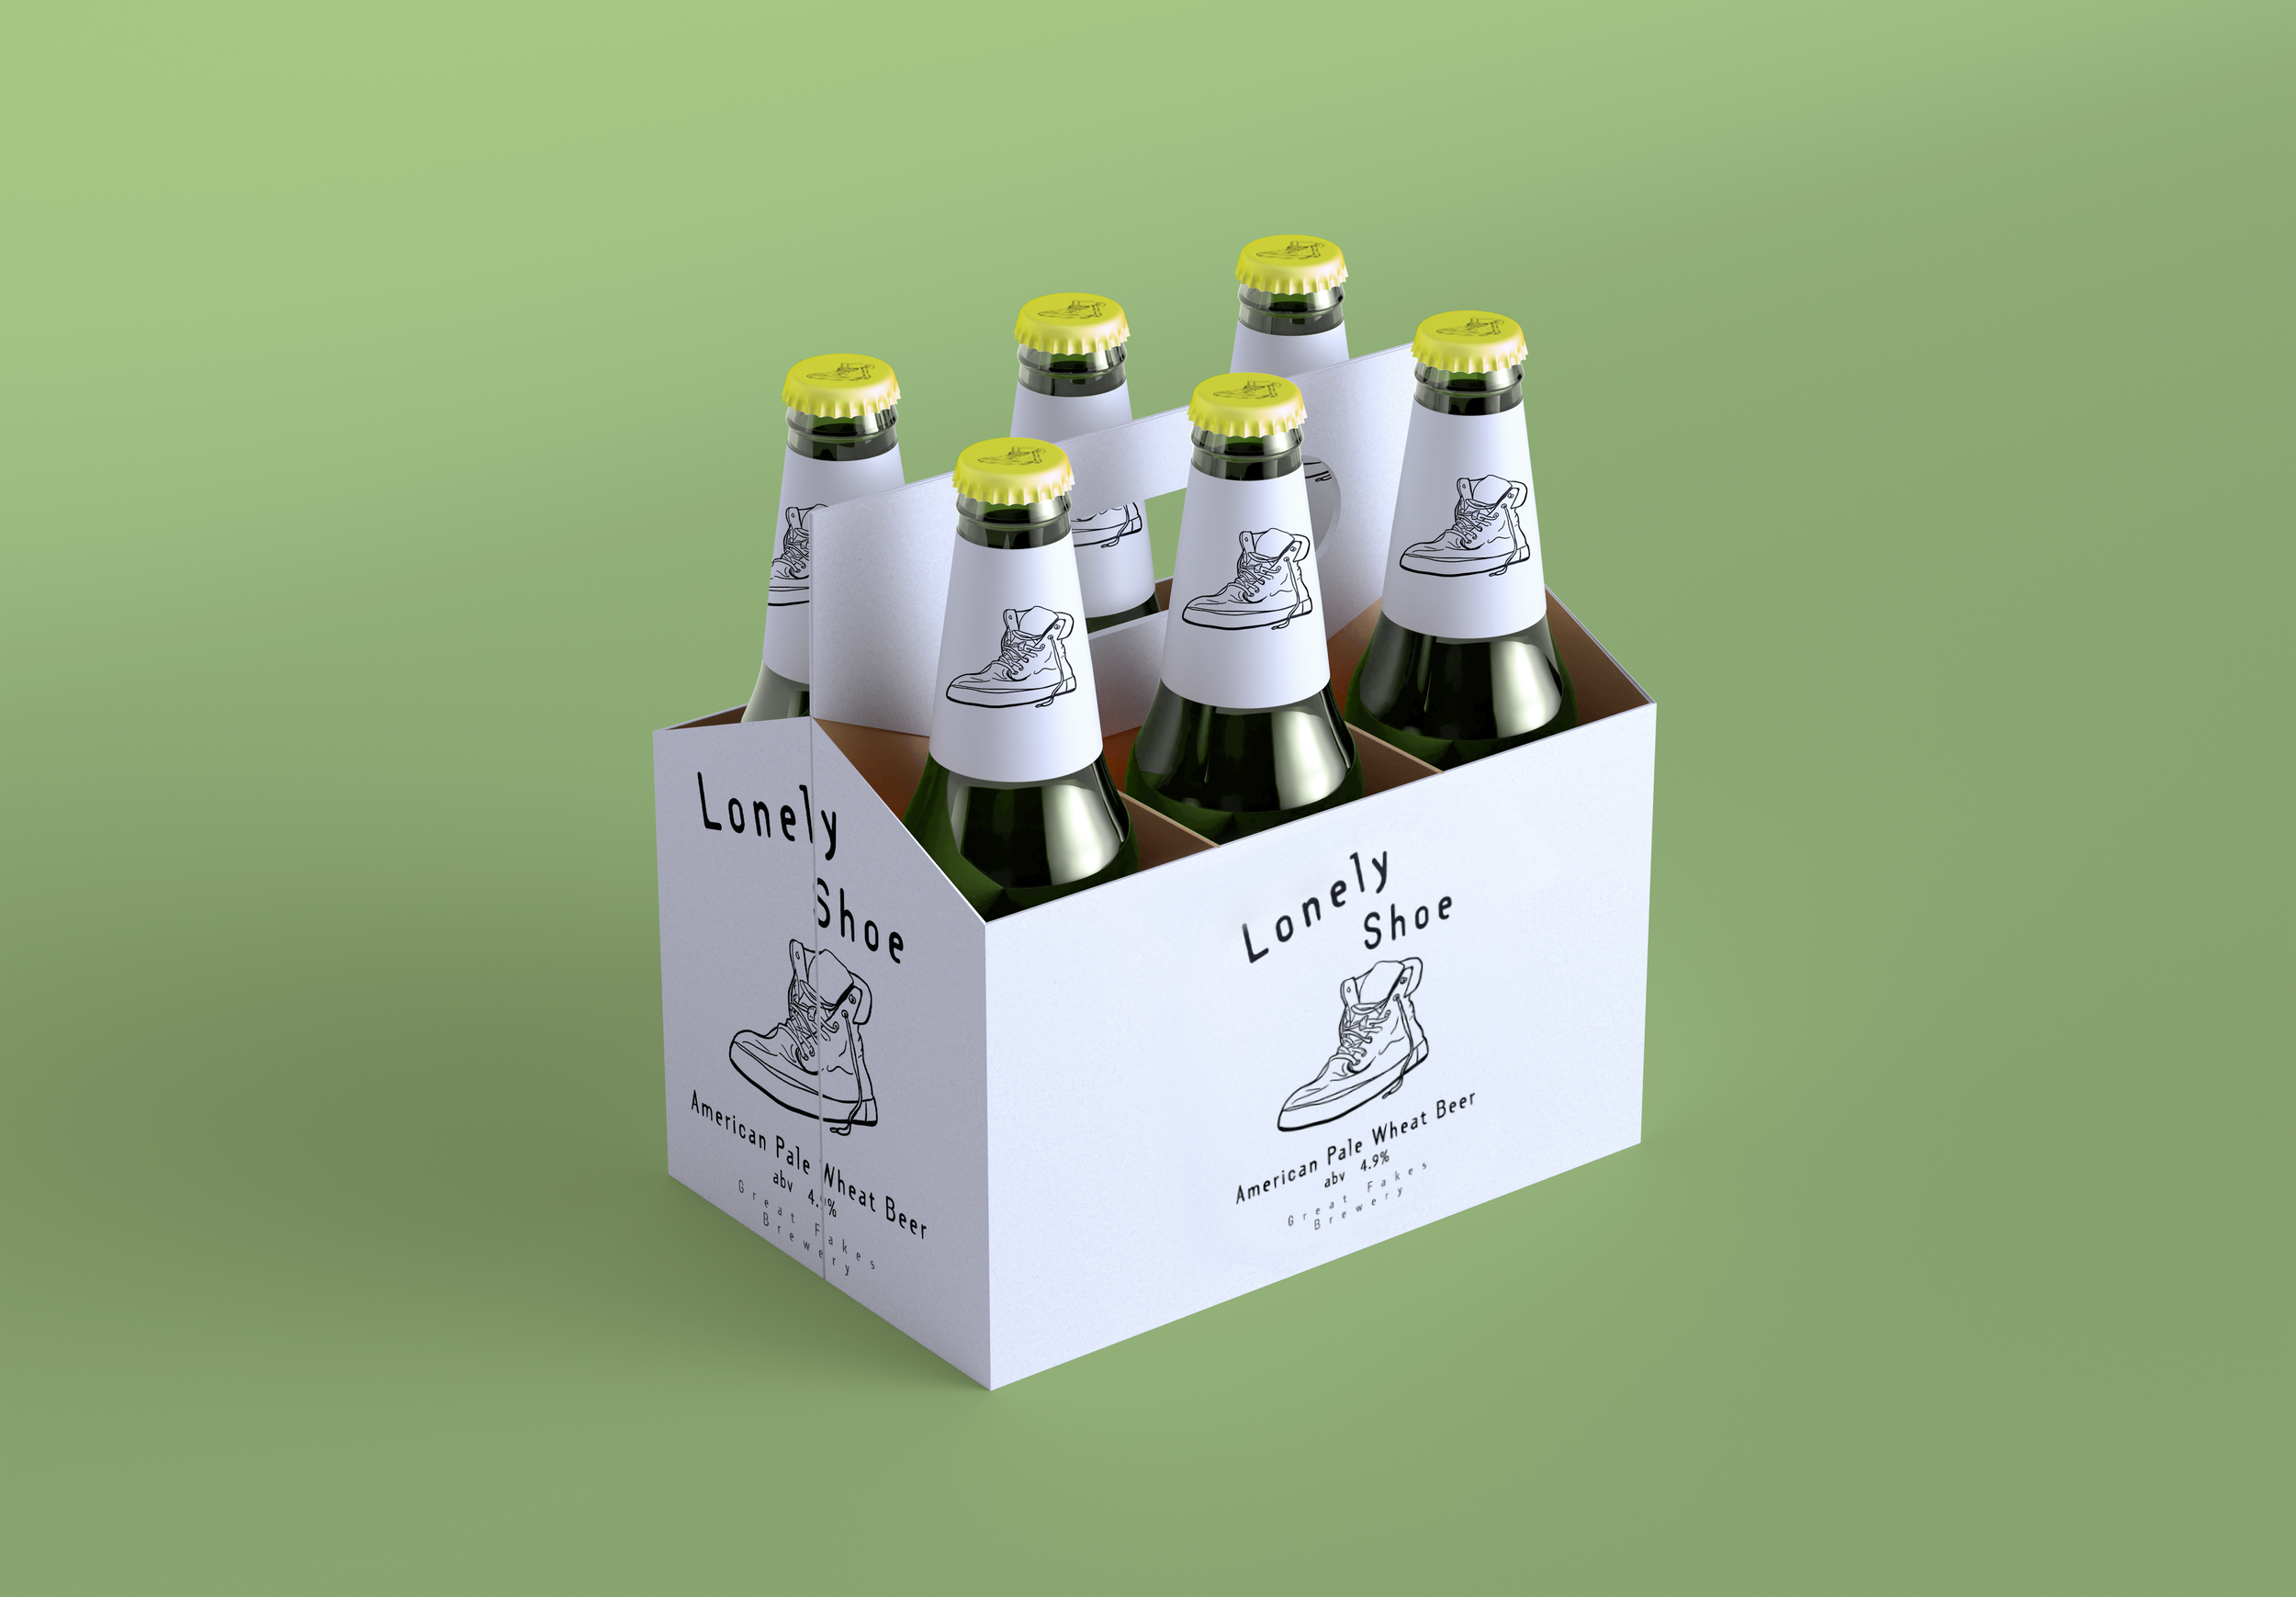 Mockup+Beer-lonely+shoe+with+box.png